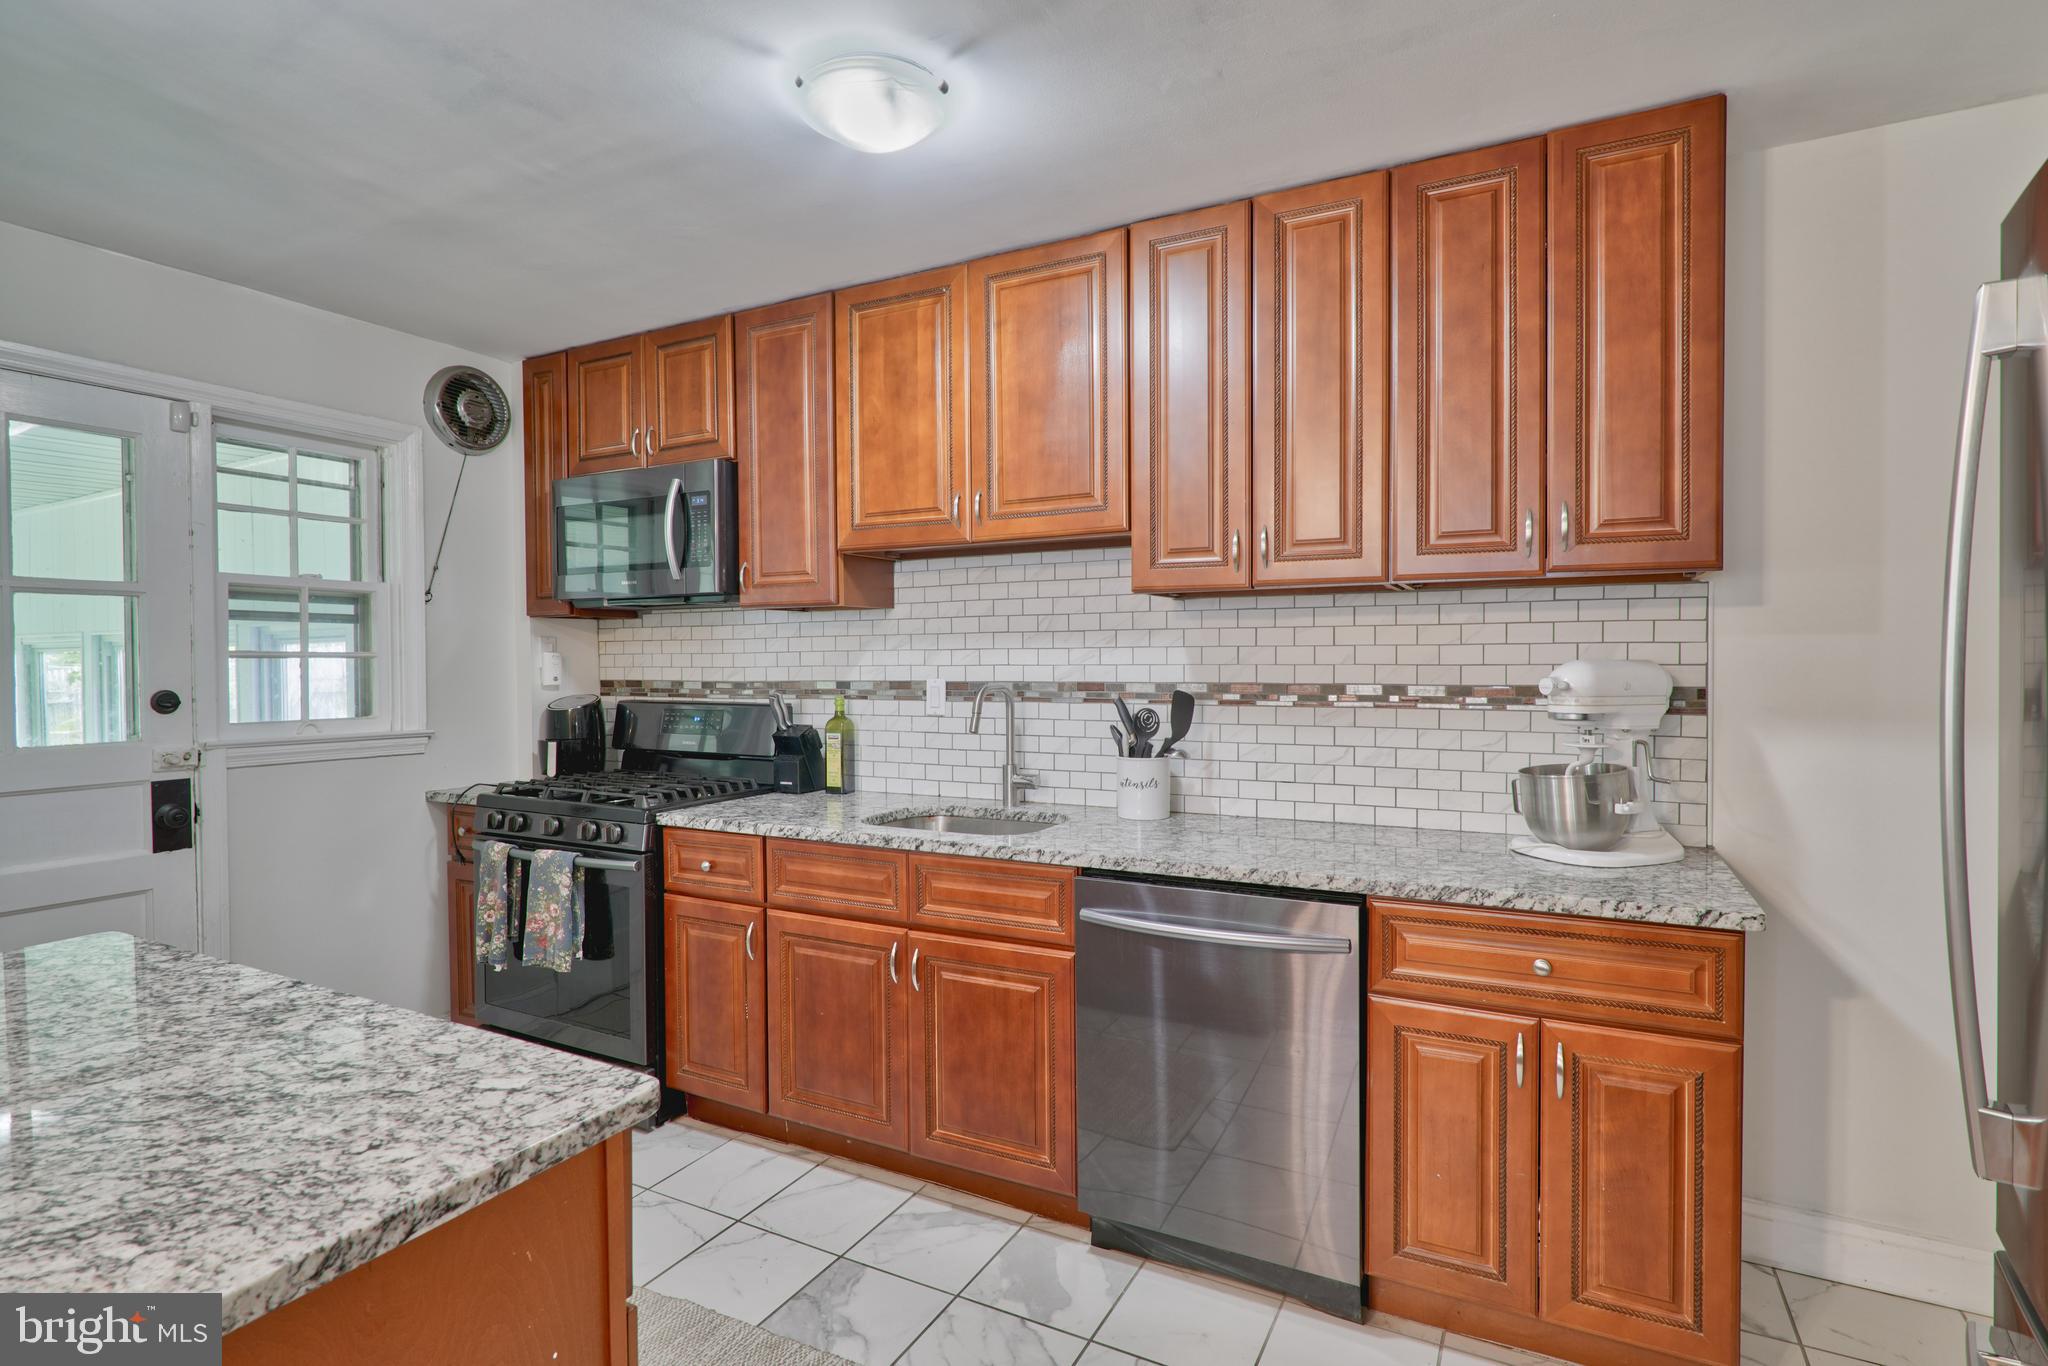 a kitchen with stainless steel appliances granite countertop wooden cabinets a sink and dishwasher